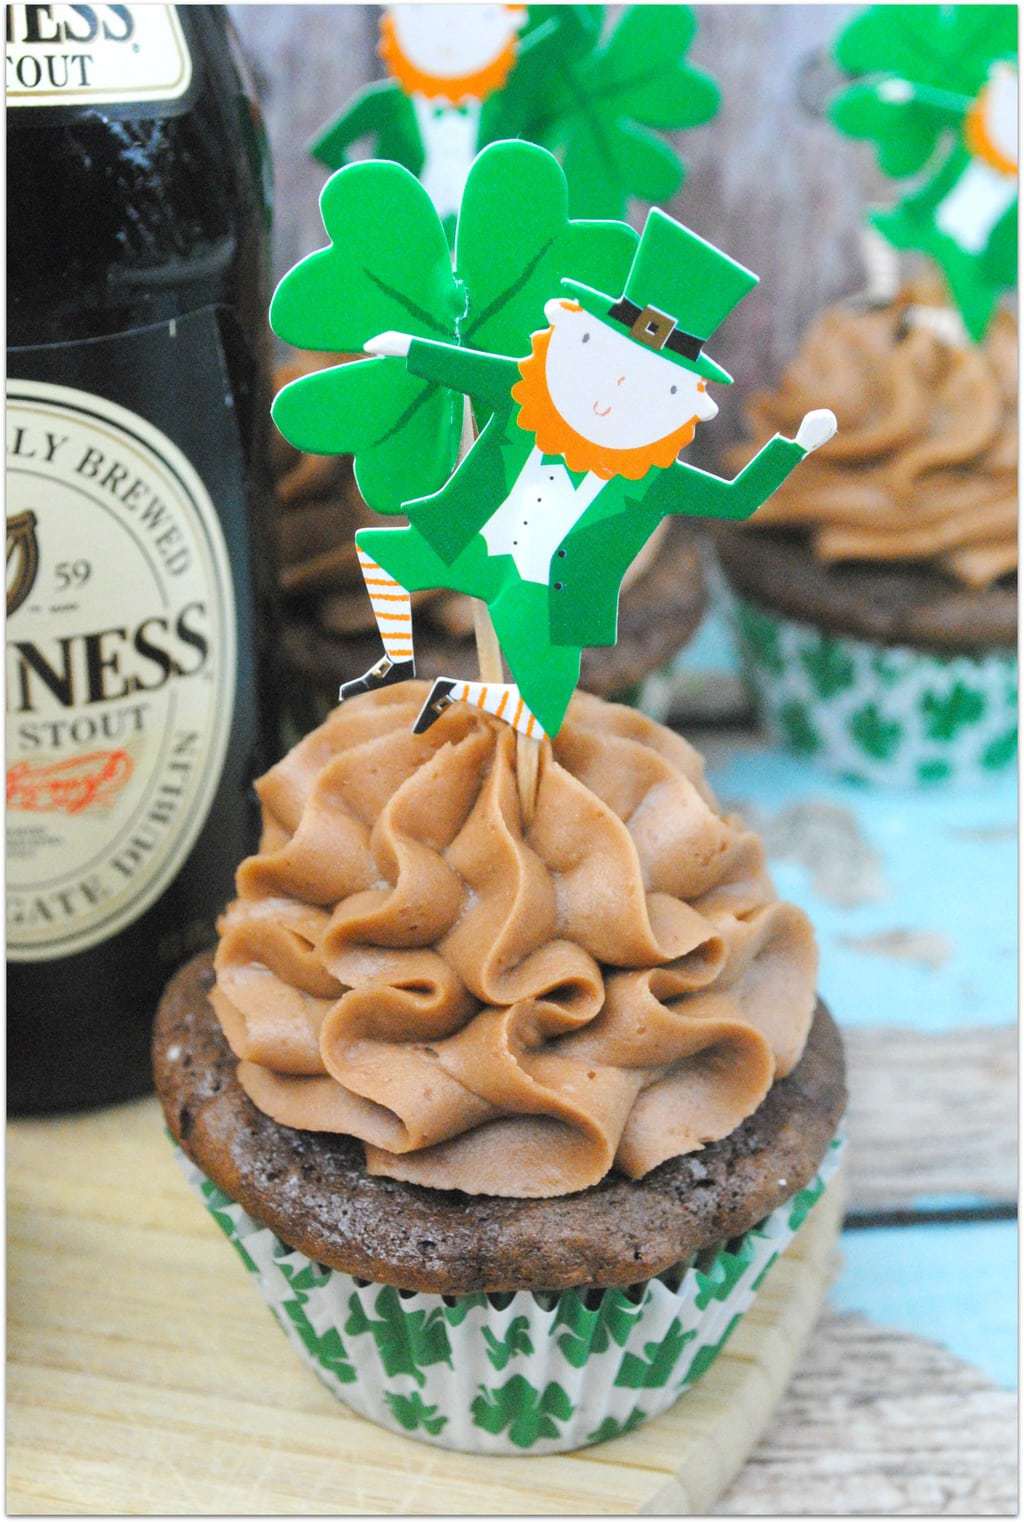 These Guinness Cupcakes with sweet cream chocolate frosting are to die for, and such an easy recipe to make! Not one for the kids as they are made with everyone's favorite Irish beer, but such a perfect dessert for that adult St. Patrick's Day Party!